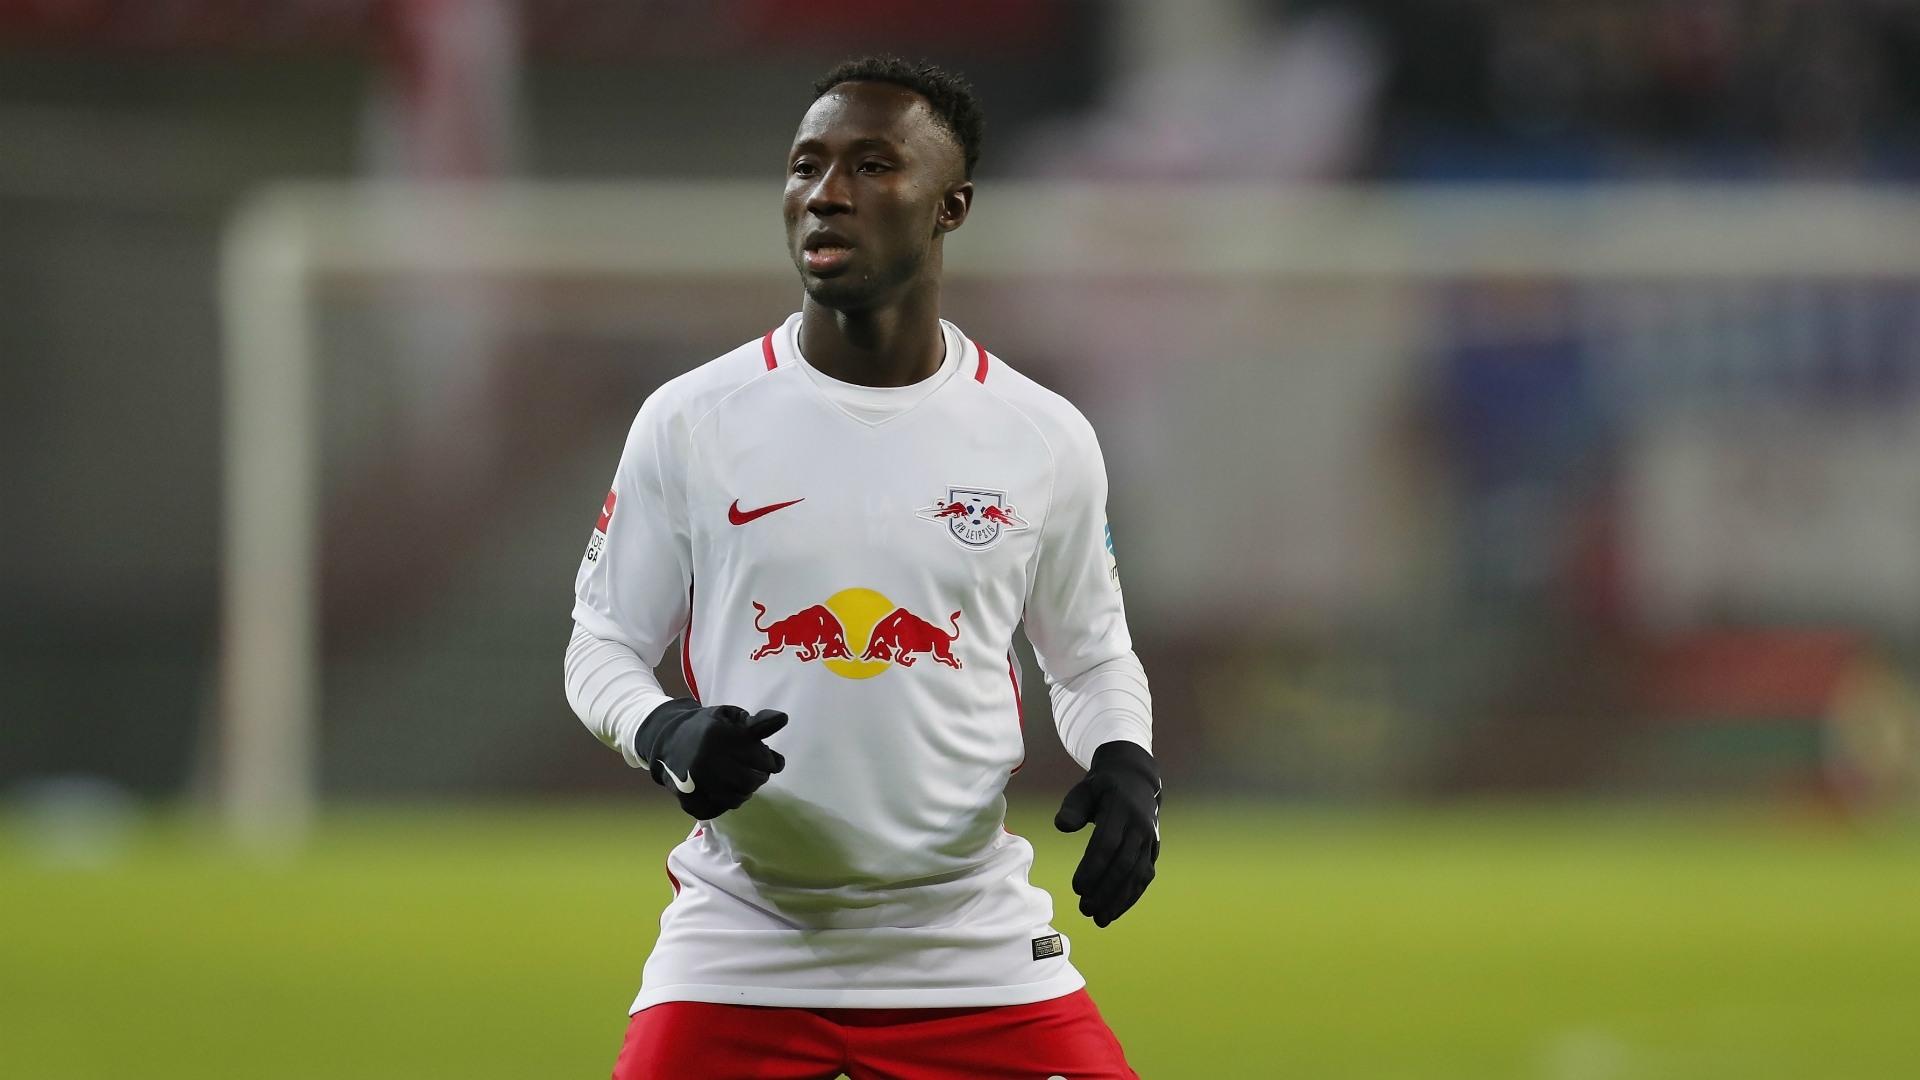 Keita of RB Leipzig is reportedly a transfer target for Liverpool